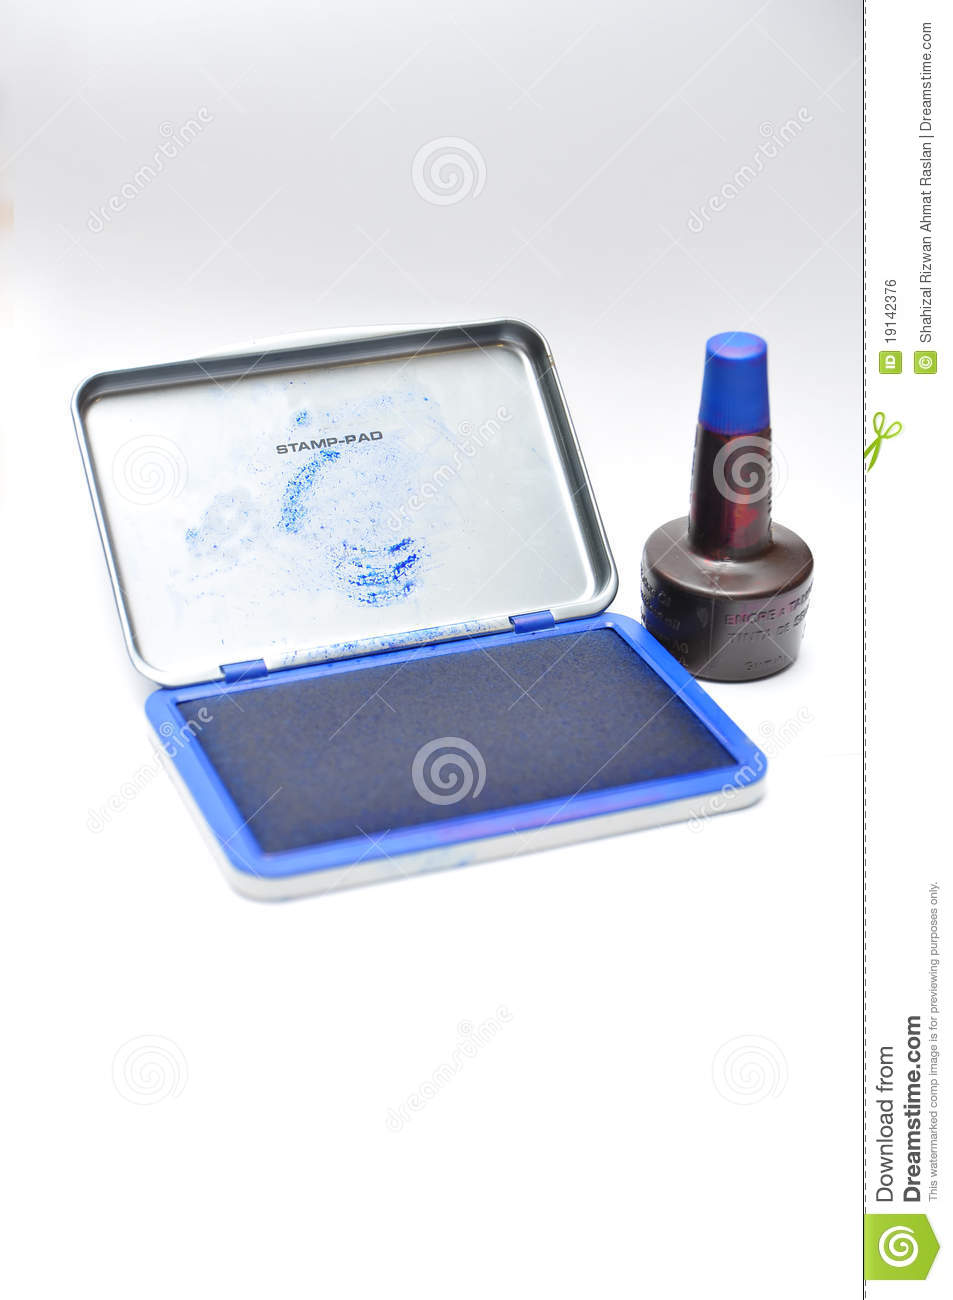 Stamp Pad With Refill Ink Royalty Free Stock Image   Image  19142376